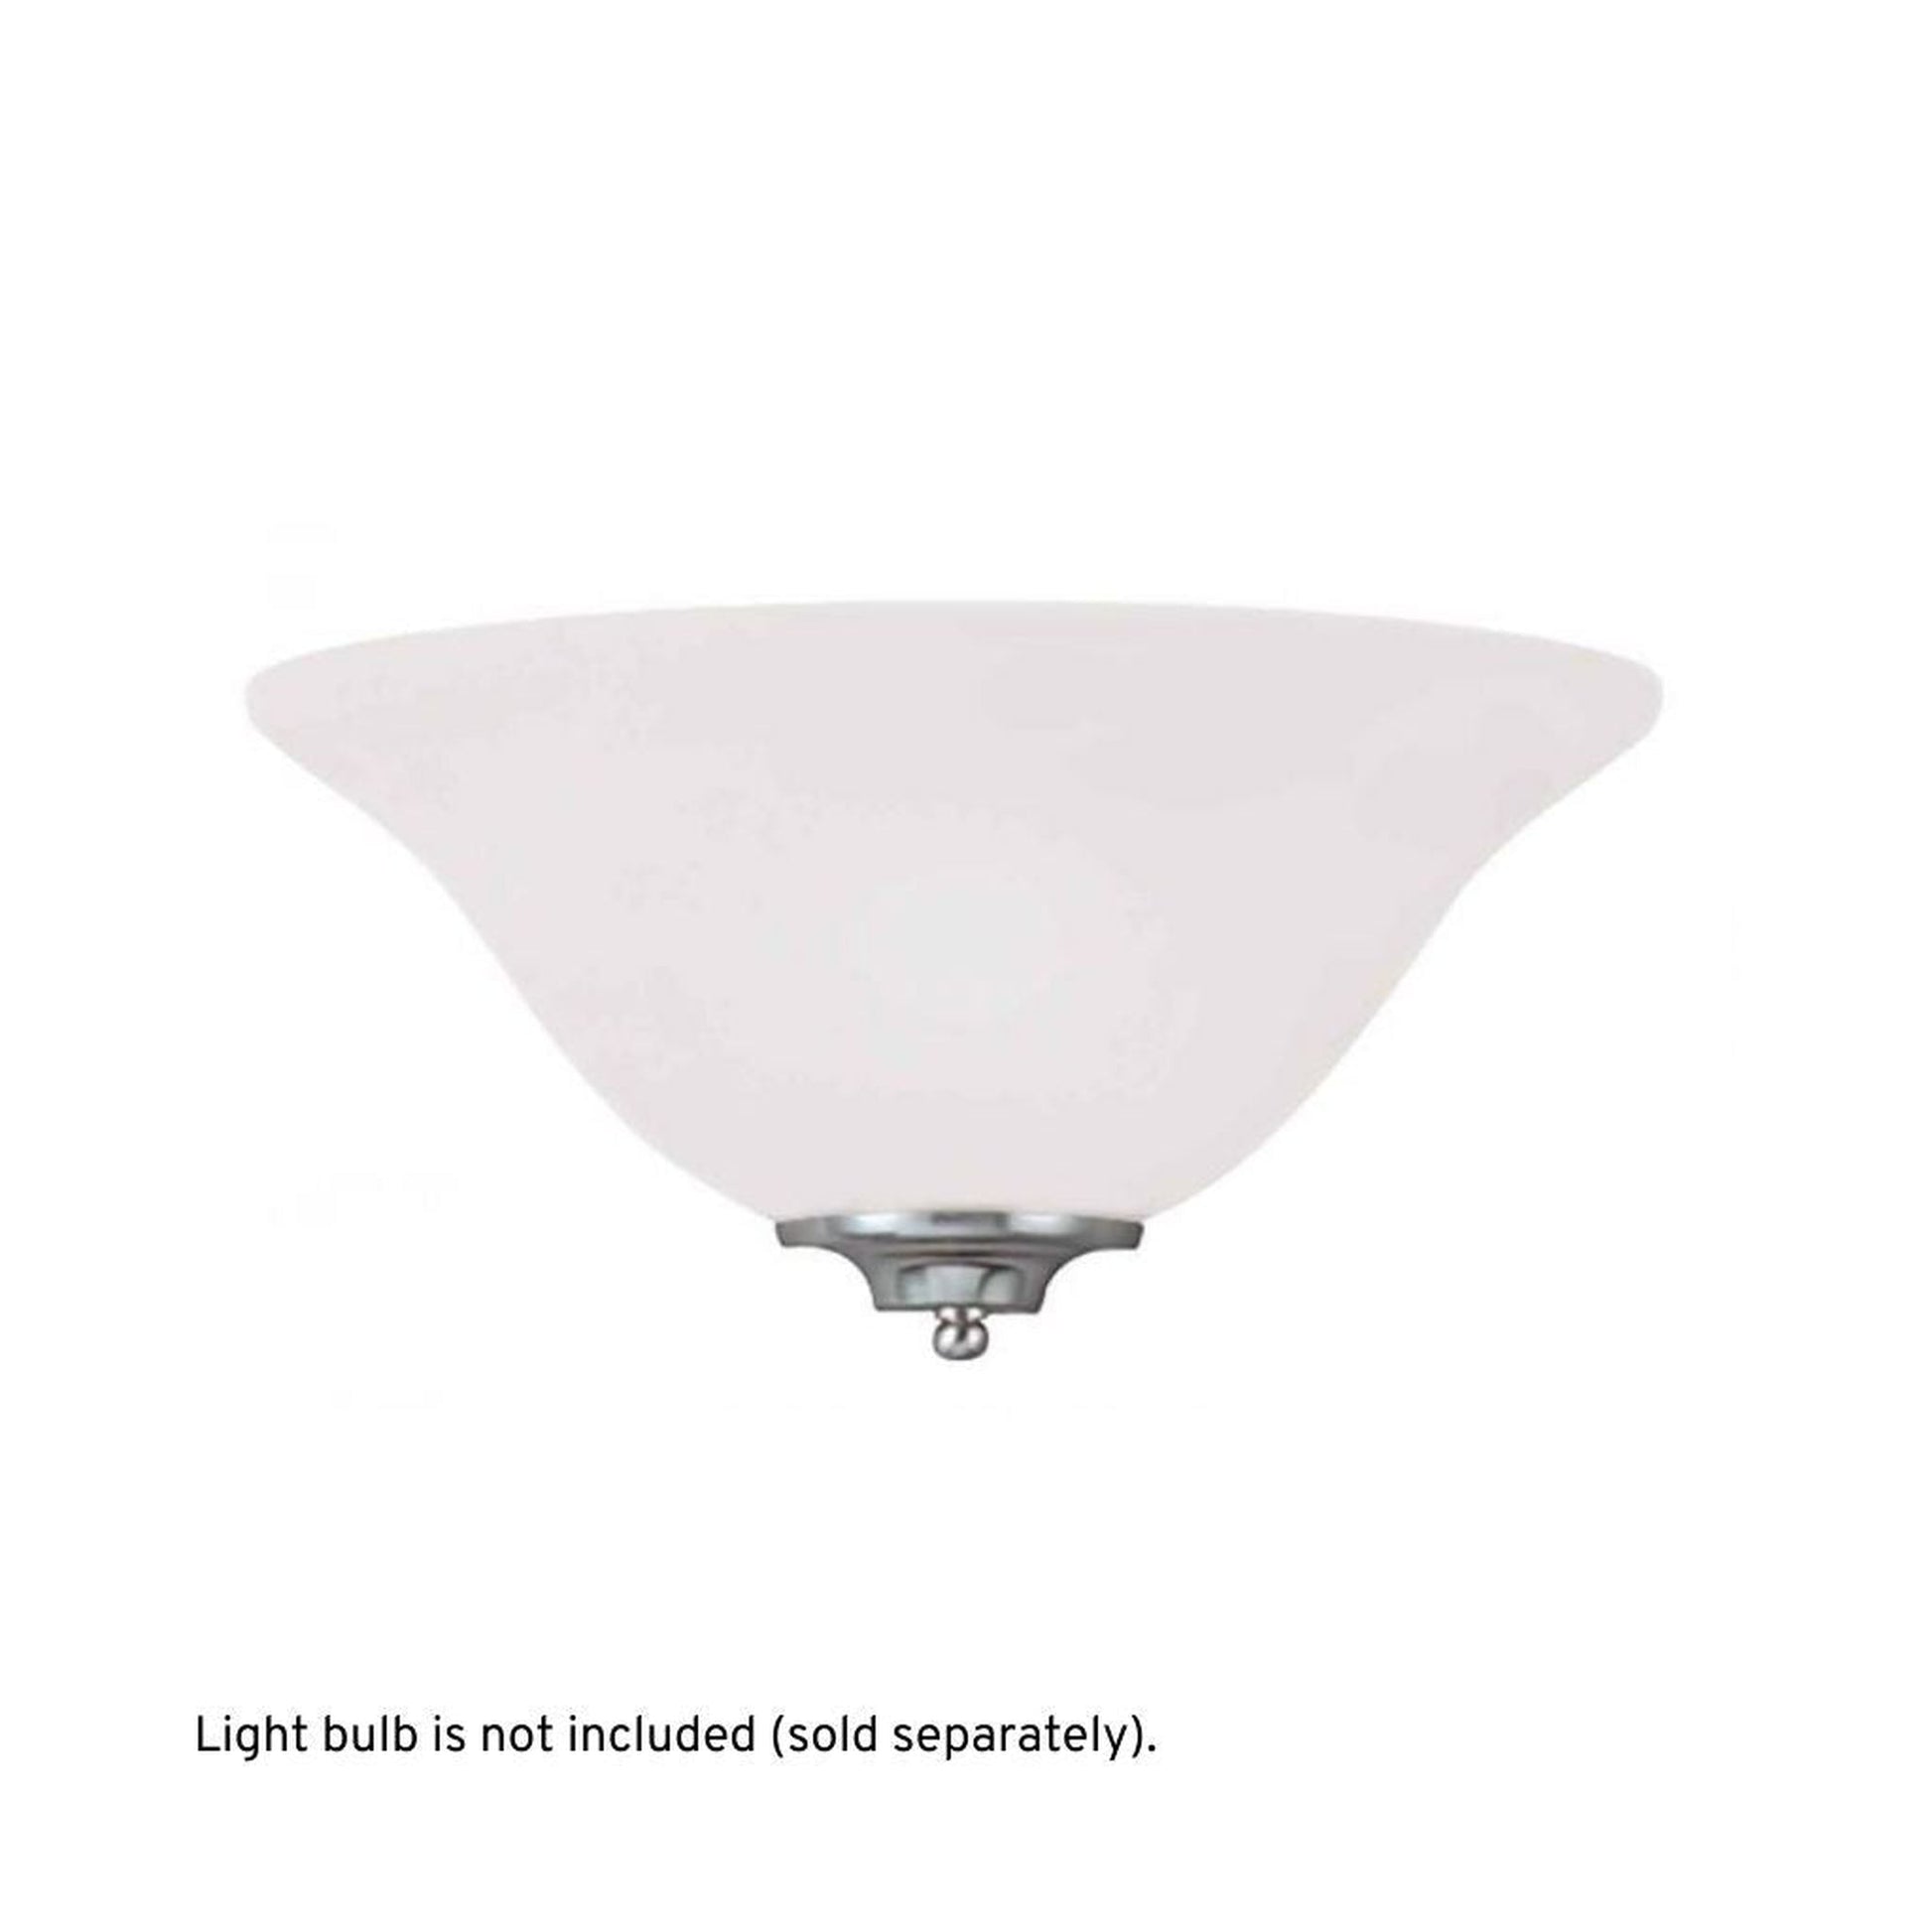 Craftmade Raleigh 7" x 13" 1-Light Satin Nickel Wall Sconce With Bowl White Frosted Glass Shade